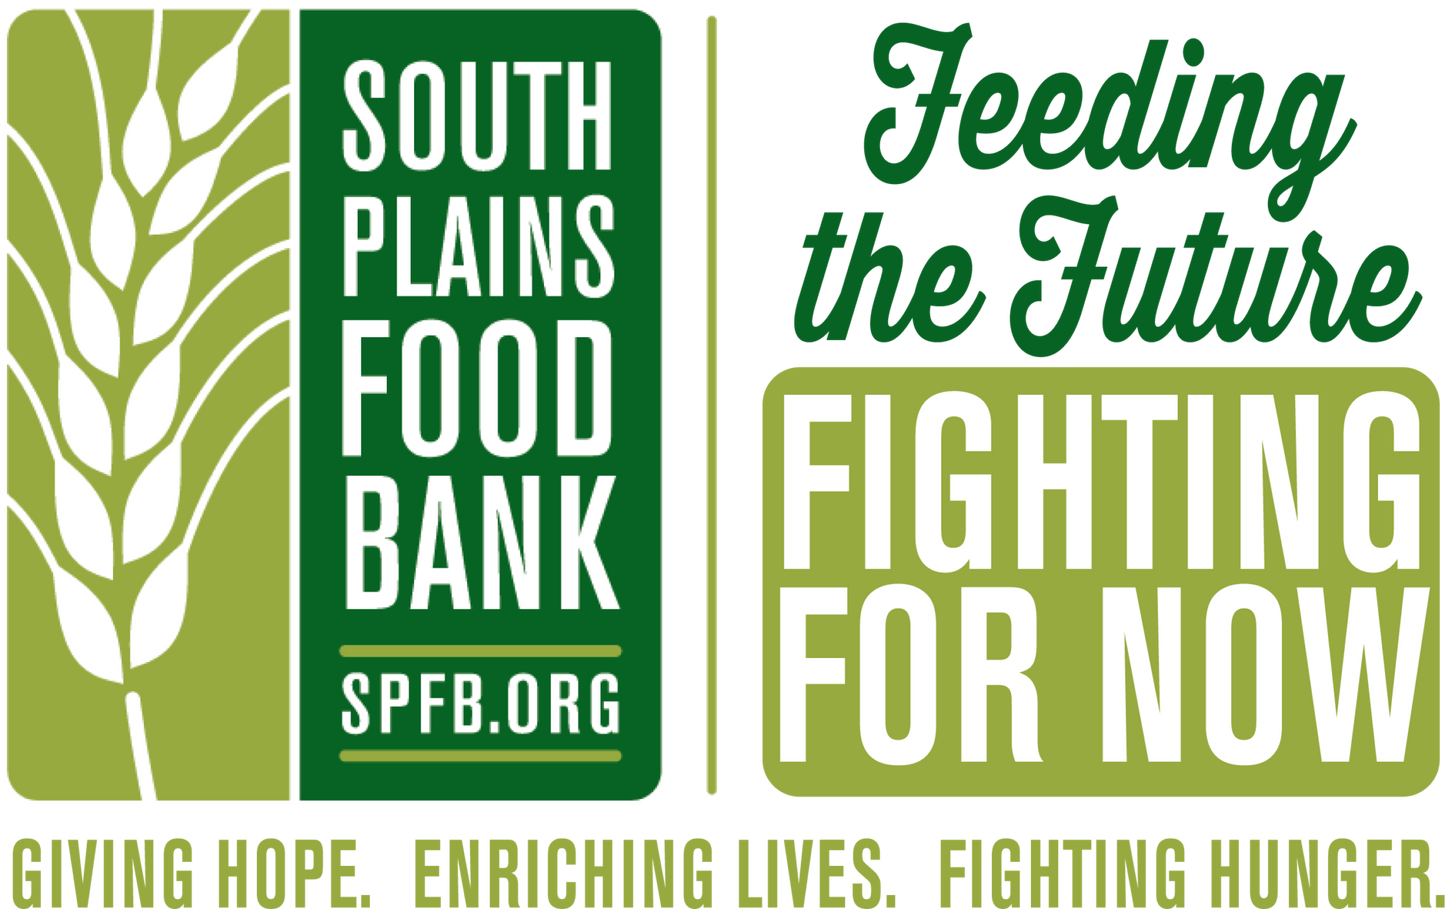 South Plains Food Bank - Ground Beef by the pound